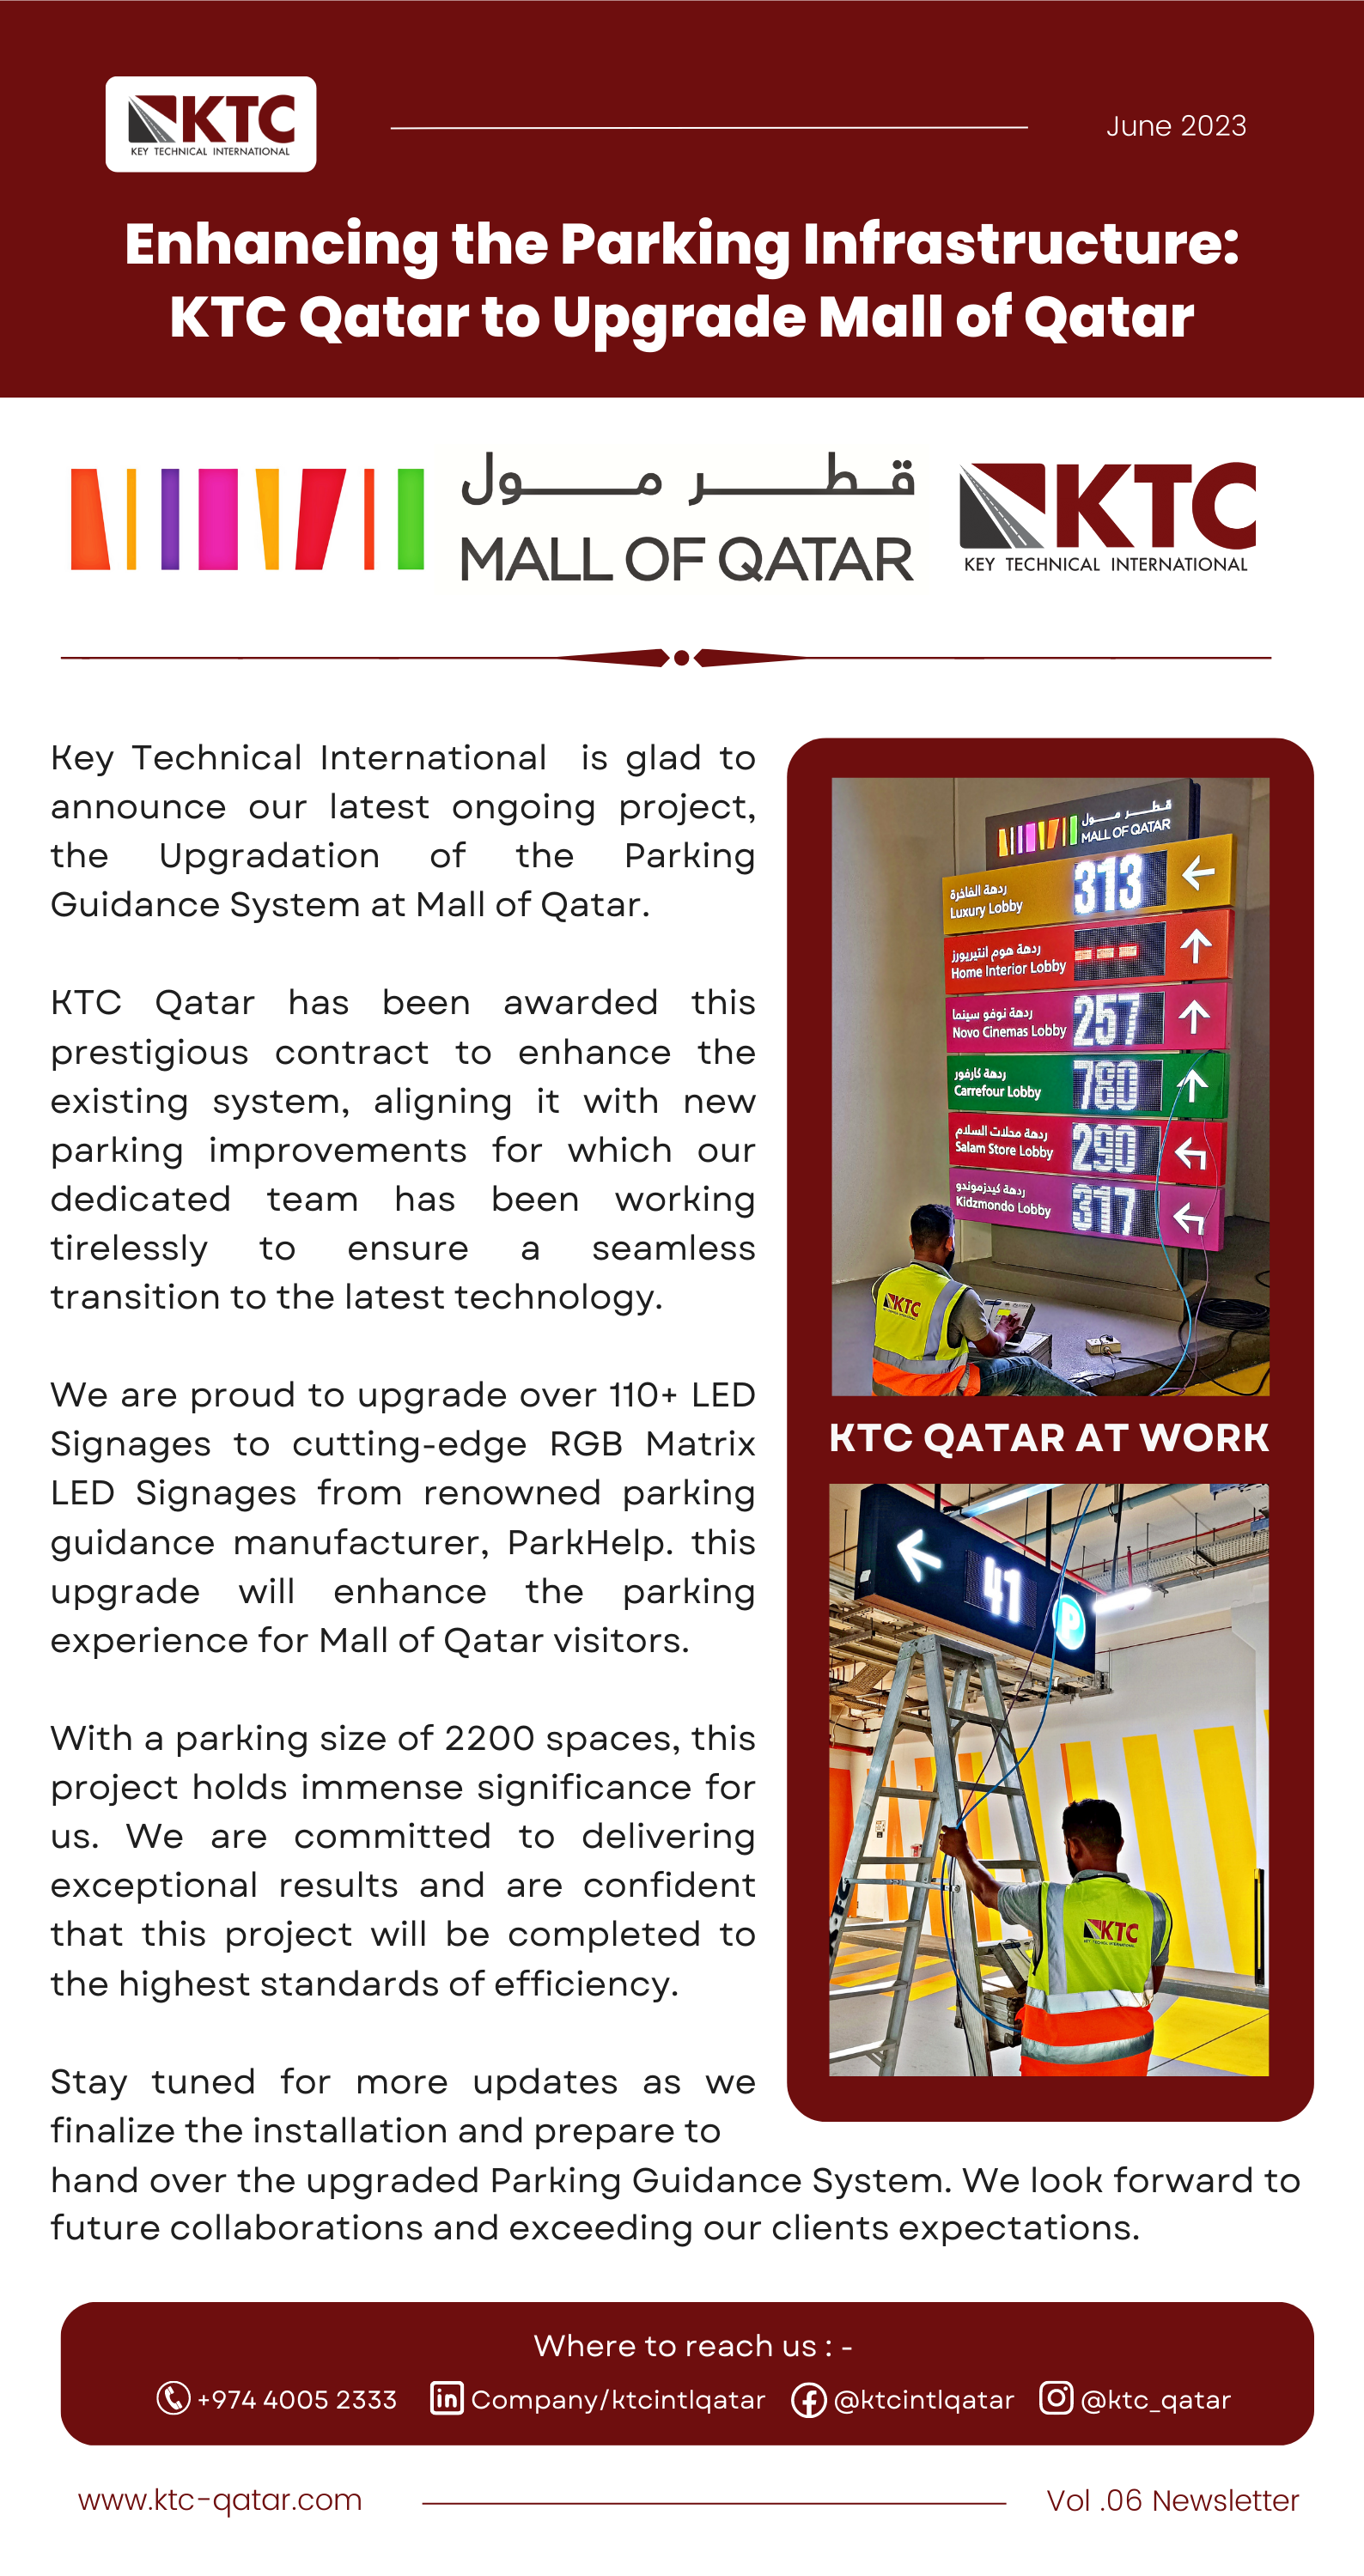 Enhancing the Parking Infrastructure: KTC Qatar to Upgrade Mall of Qatar